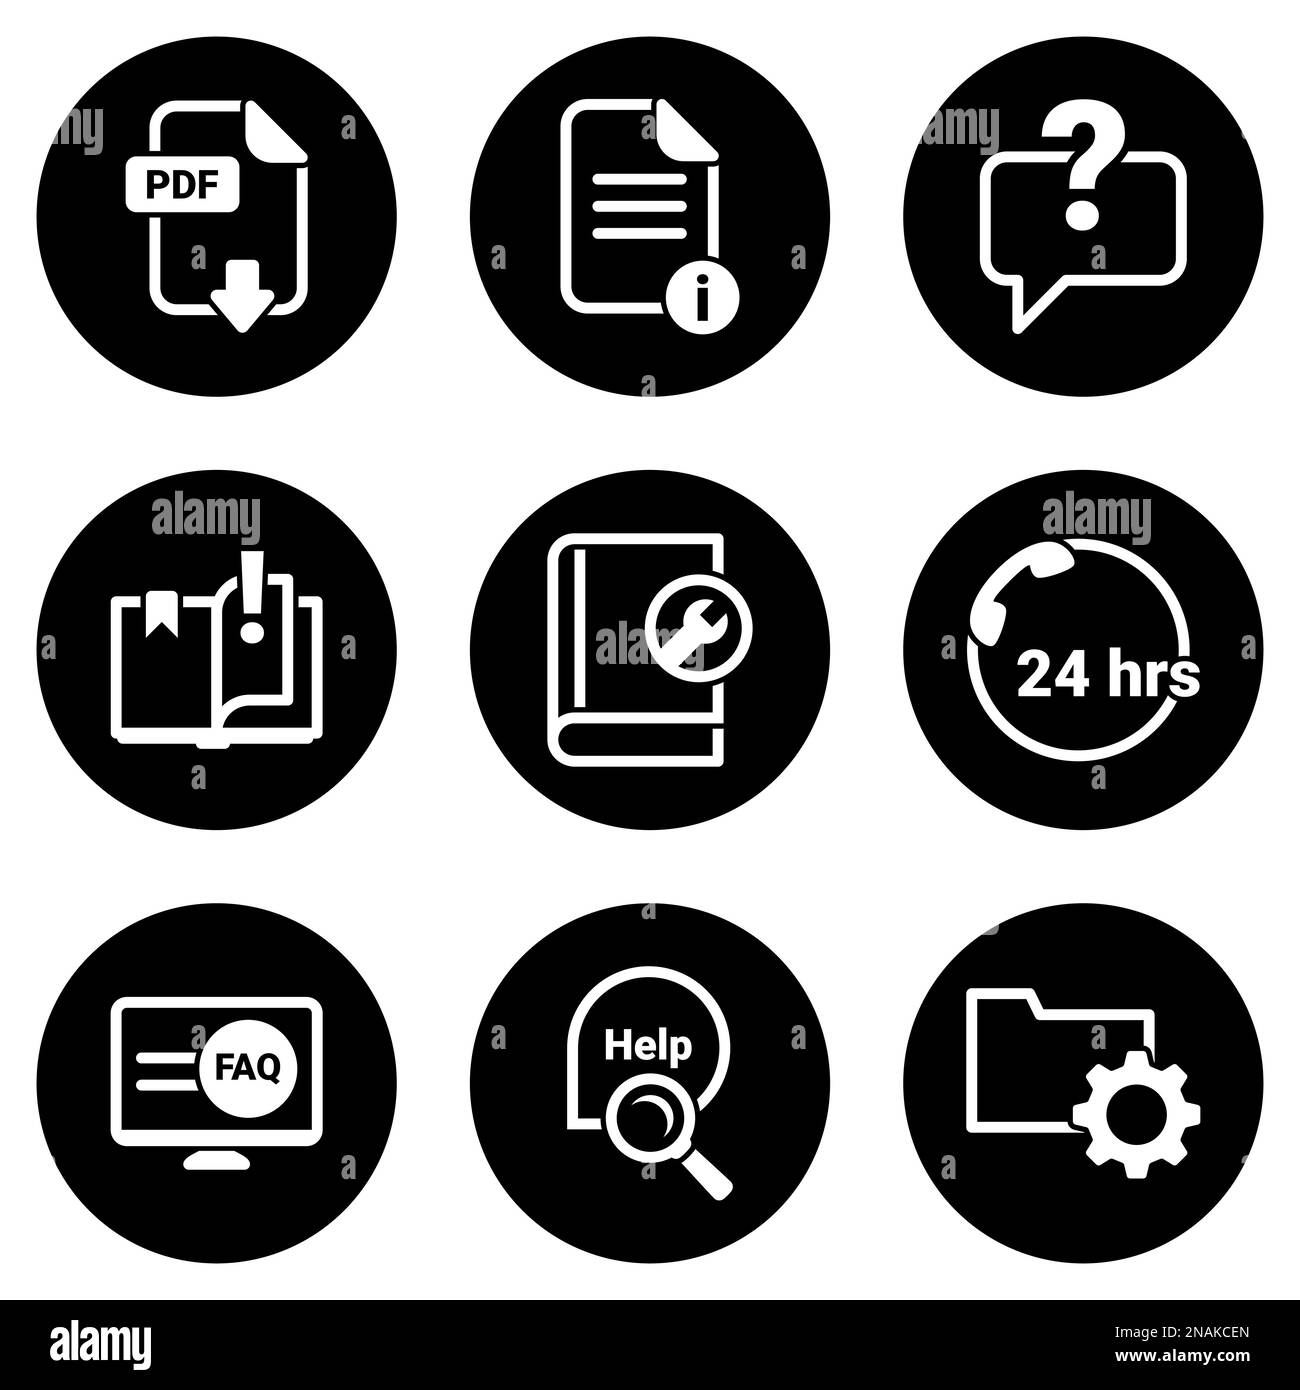 Set of simple icons on a theme manual, vector, design, collection, flat, sign, symbol,element, object, illustration, isolated. White background Stock Vector